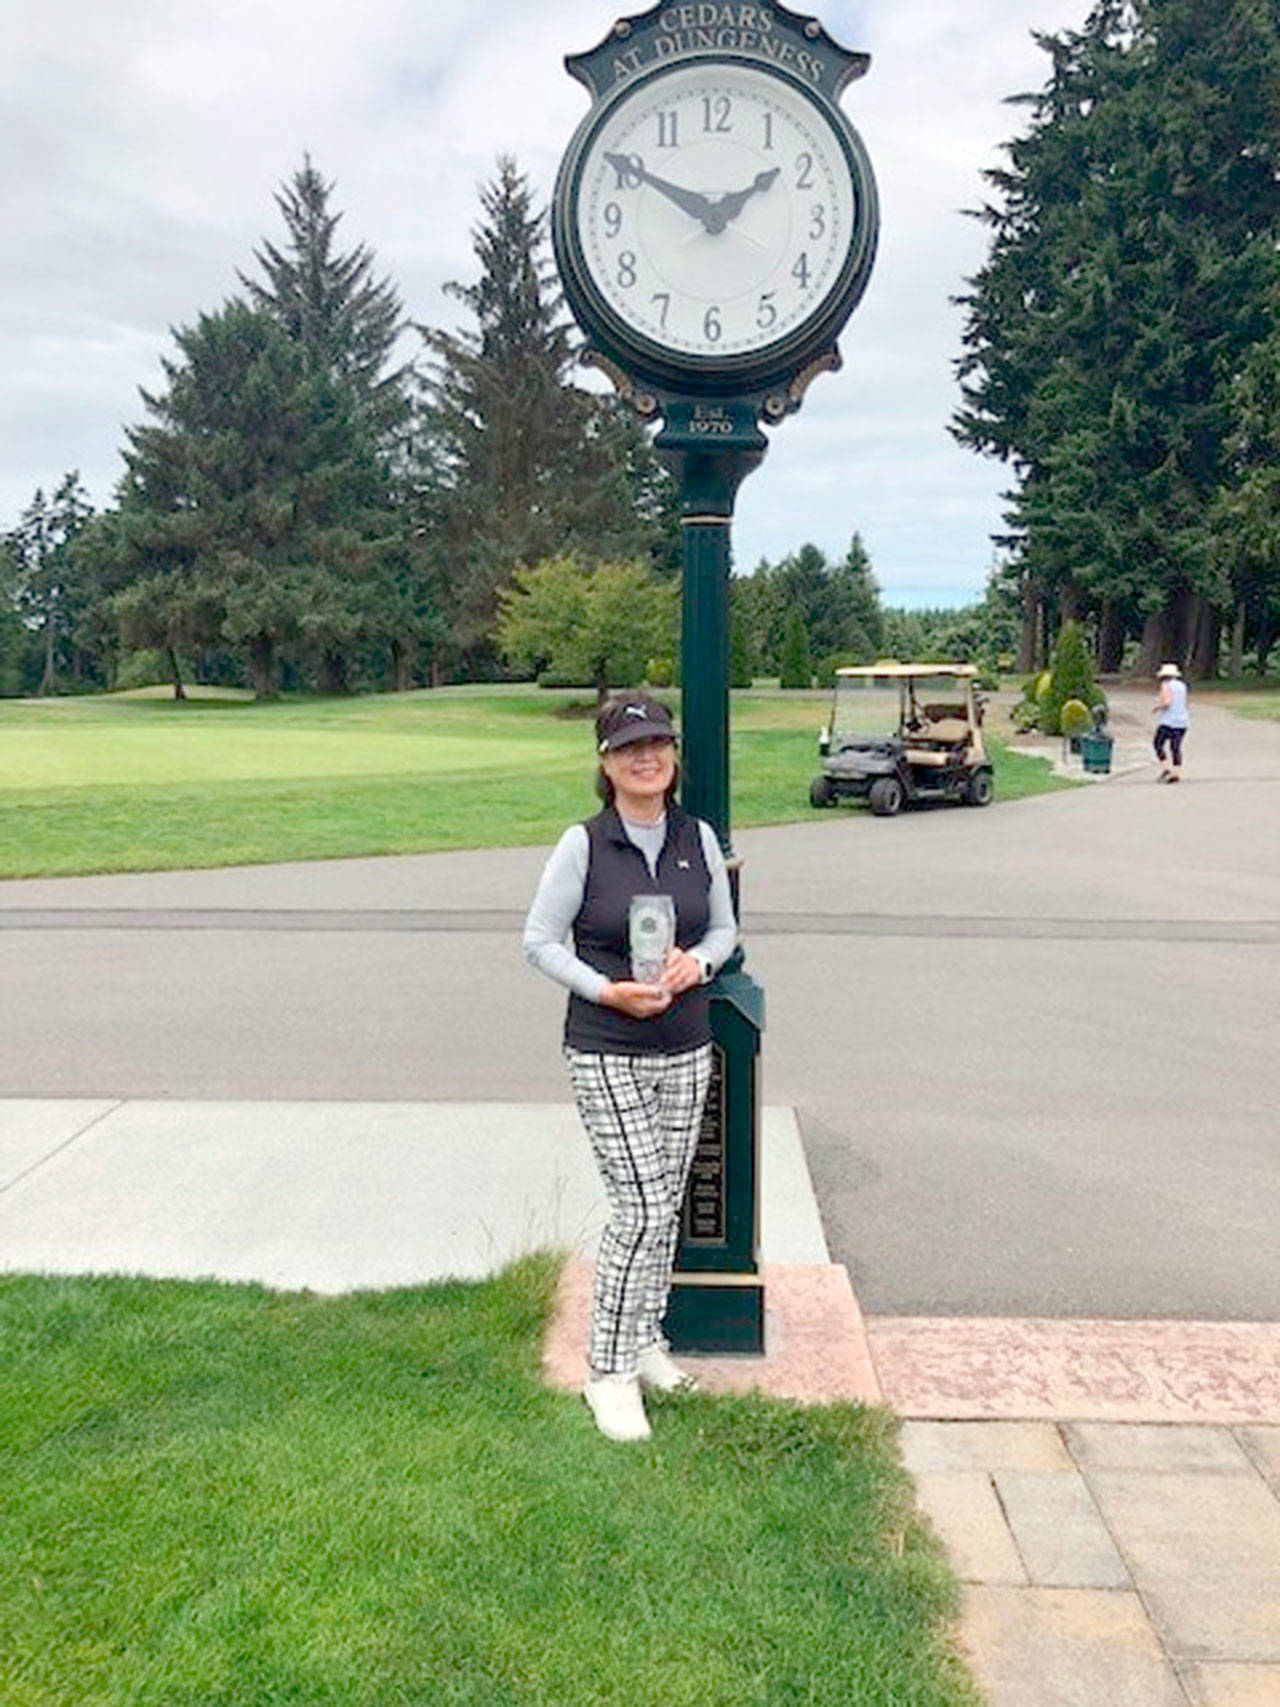 The Cedars at Dungeness Women’s Golf Association recently crowned Yoon Park as its 2020 low net champion. (Submitted photo)